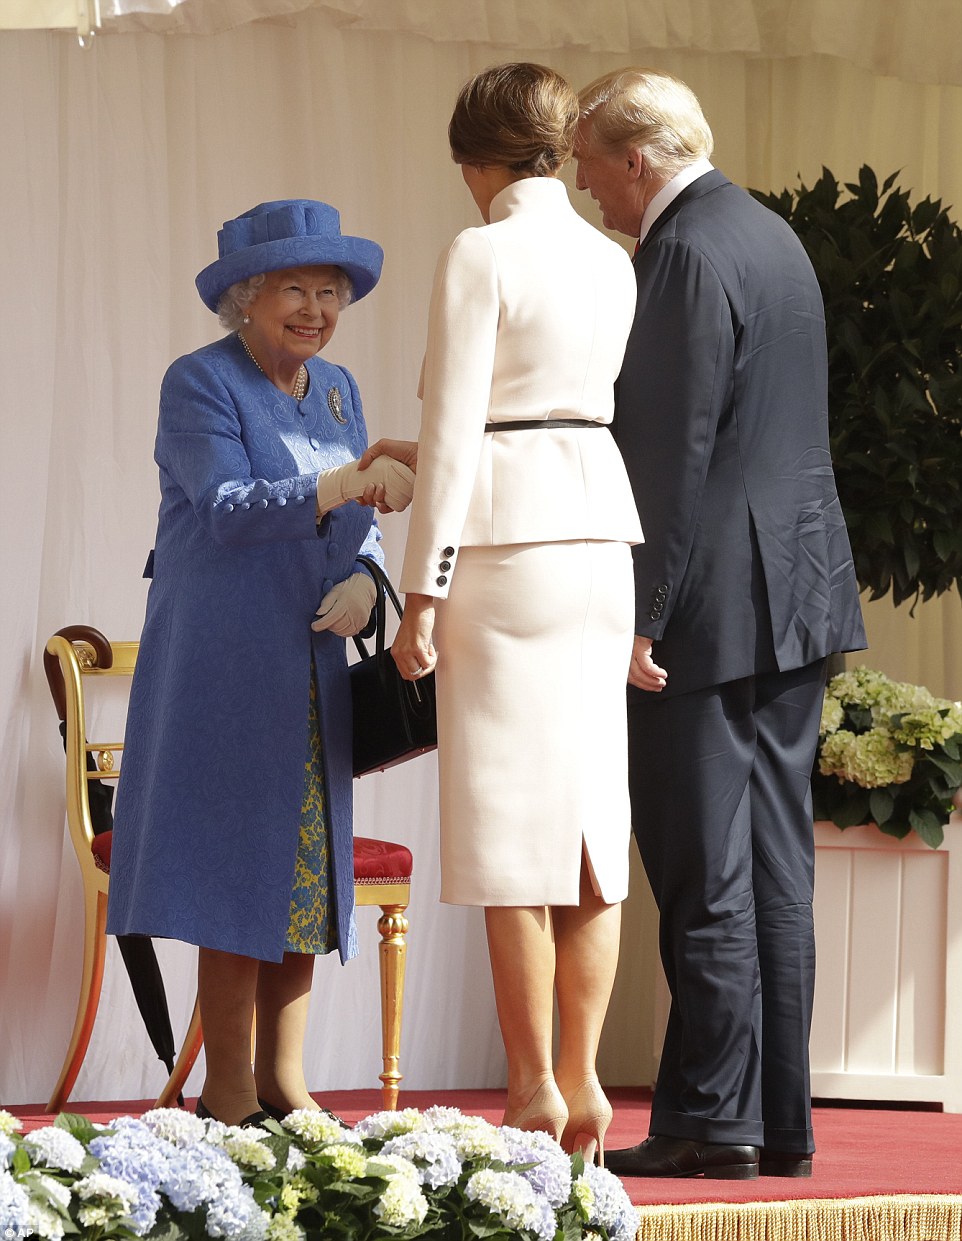 4E3573E900000578-5952671-The_first_lady_also_met_the_Queen_with_a_handshake_rather_than_t-a-4_1531538951357.jpg